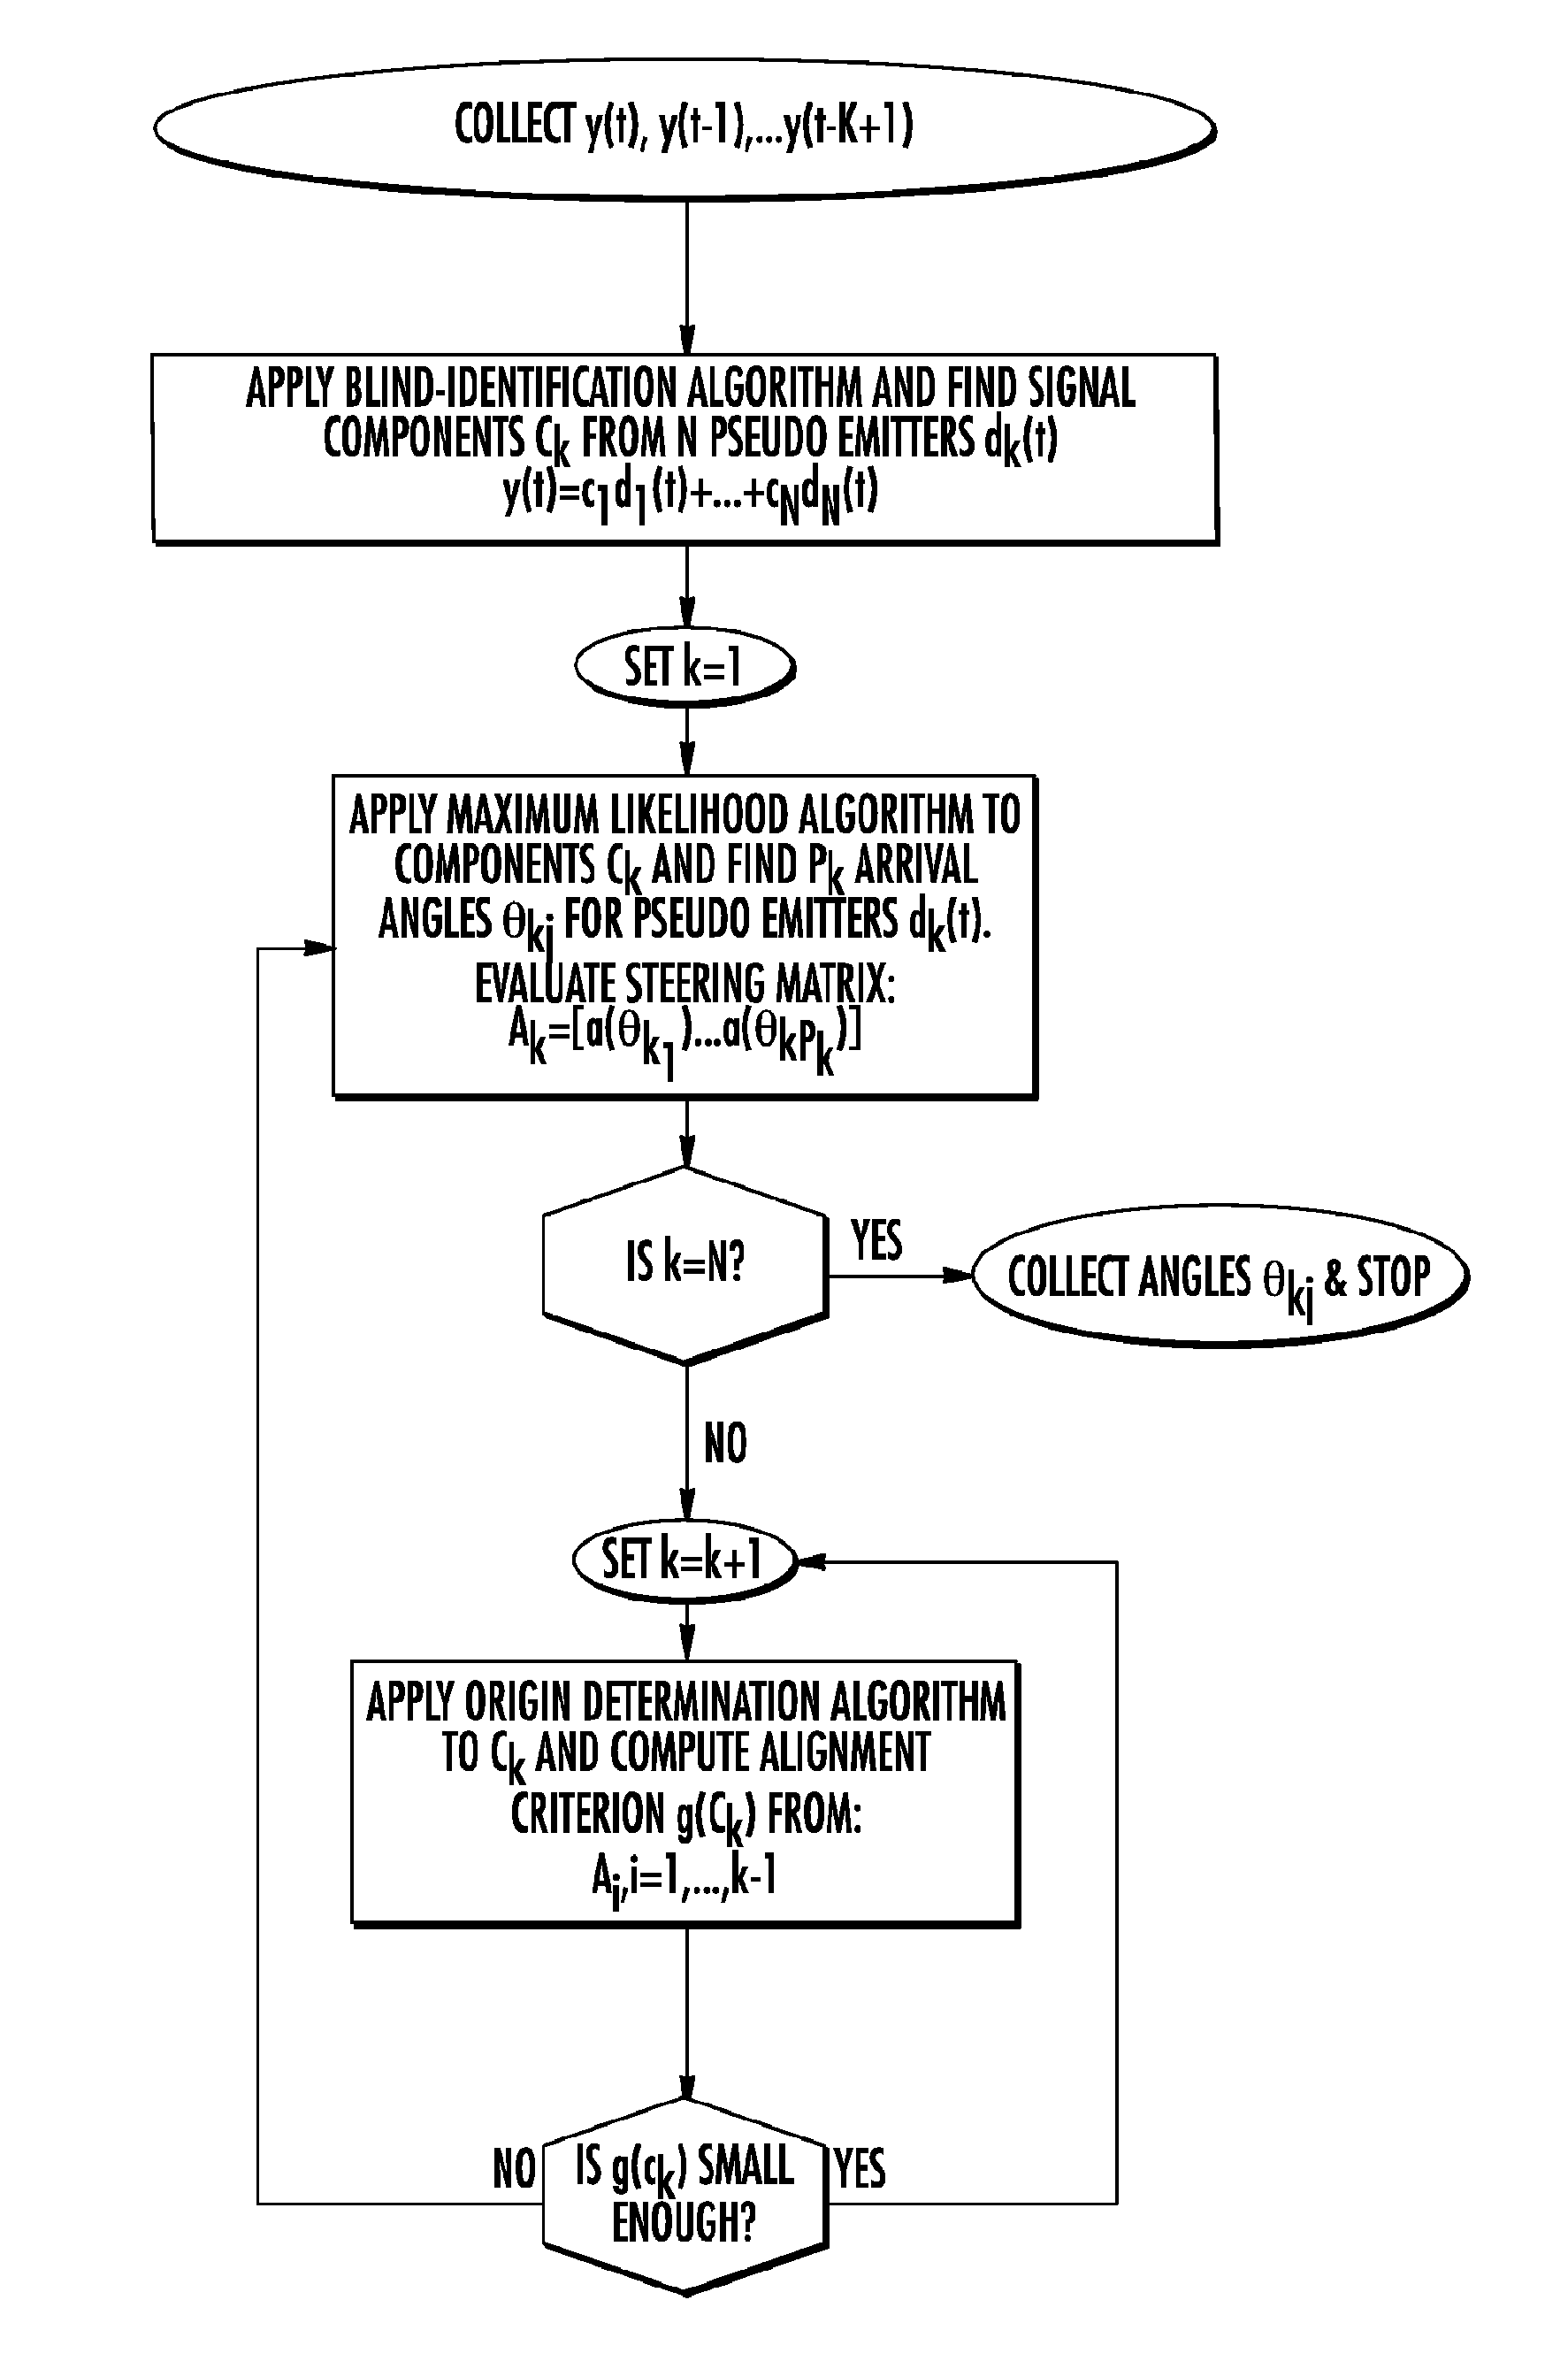 Radio frequency signal acquisition and source location system